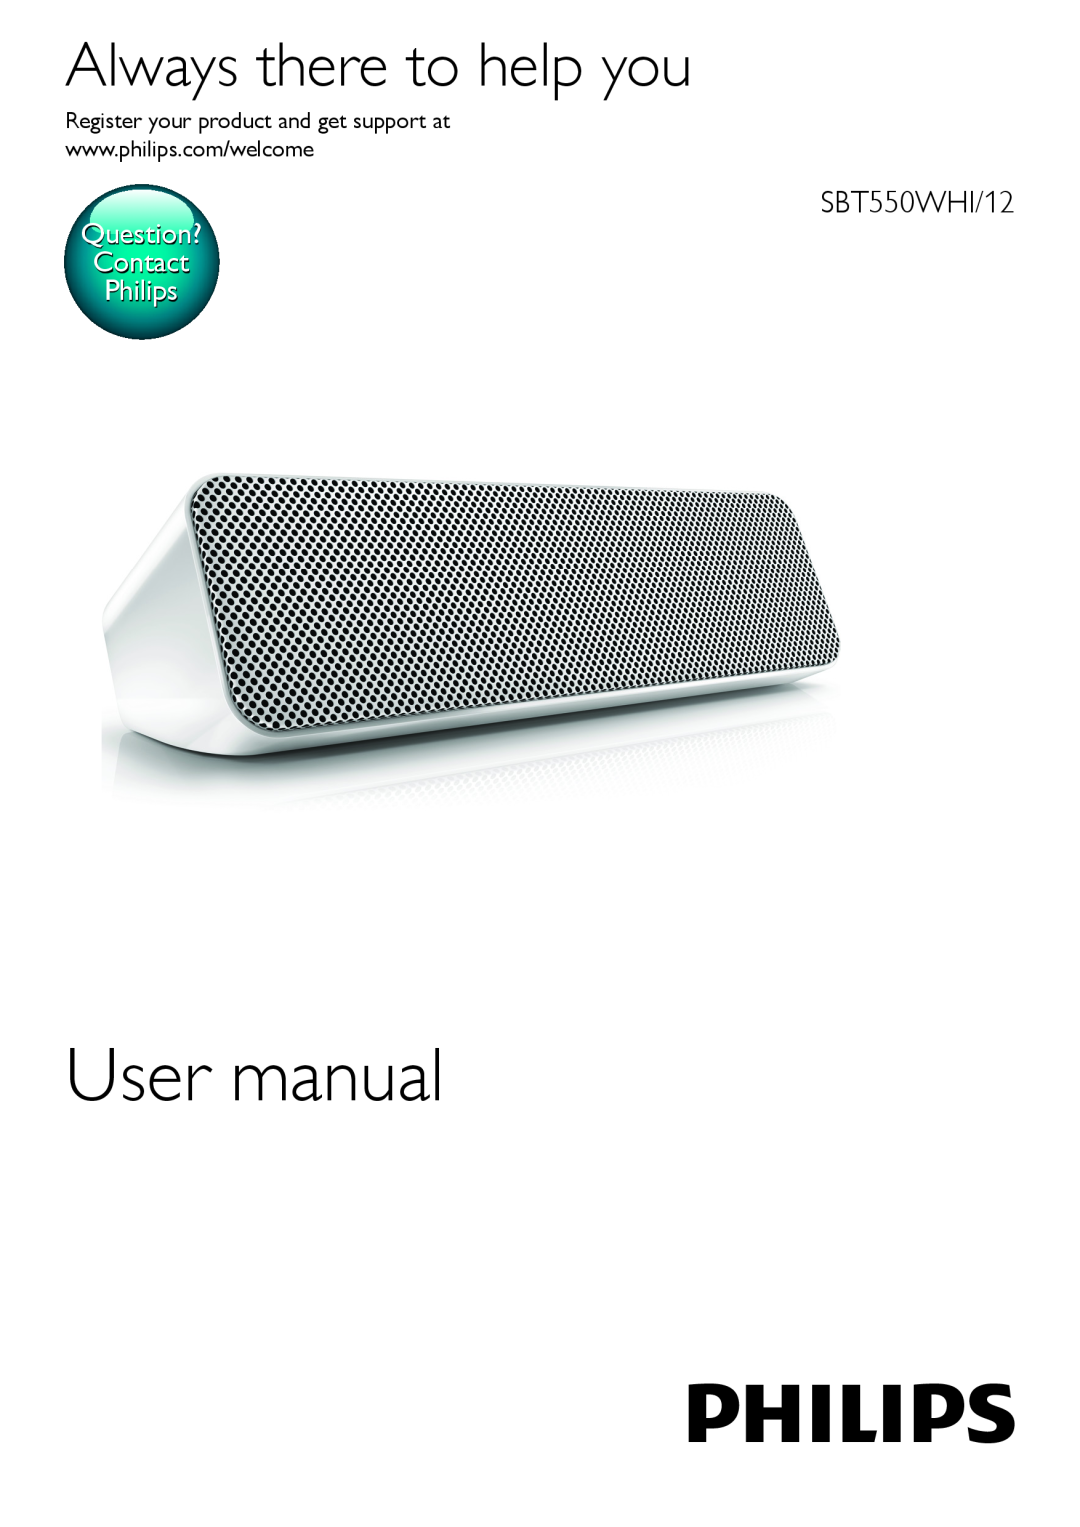 Philips SBT550WHI/12 user manual Always there to help you, Question? Contact Philips 